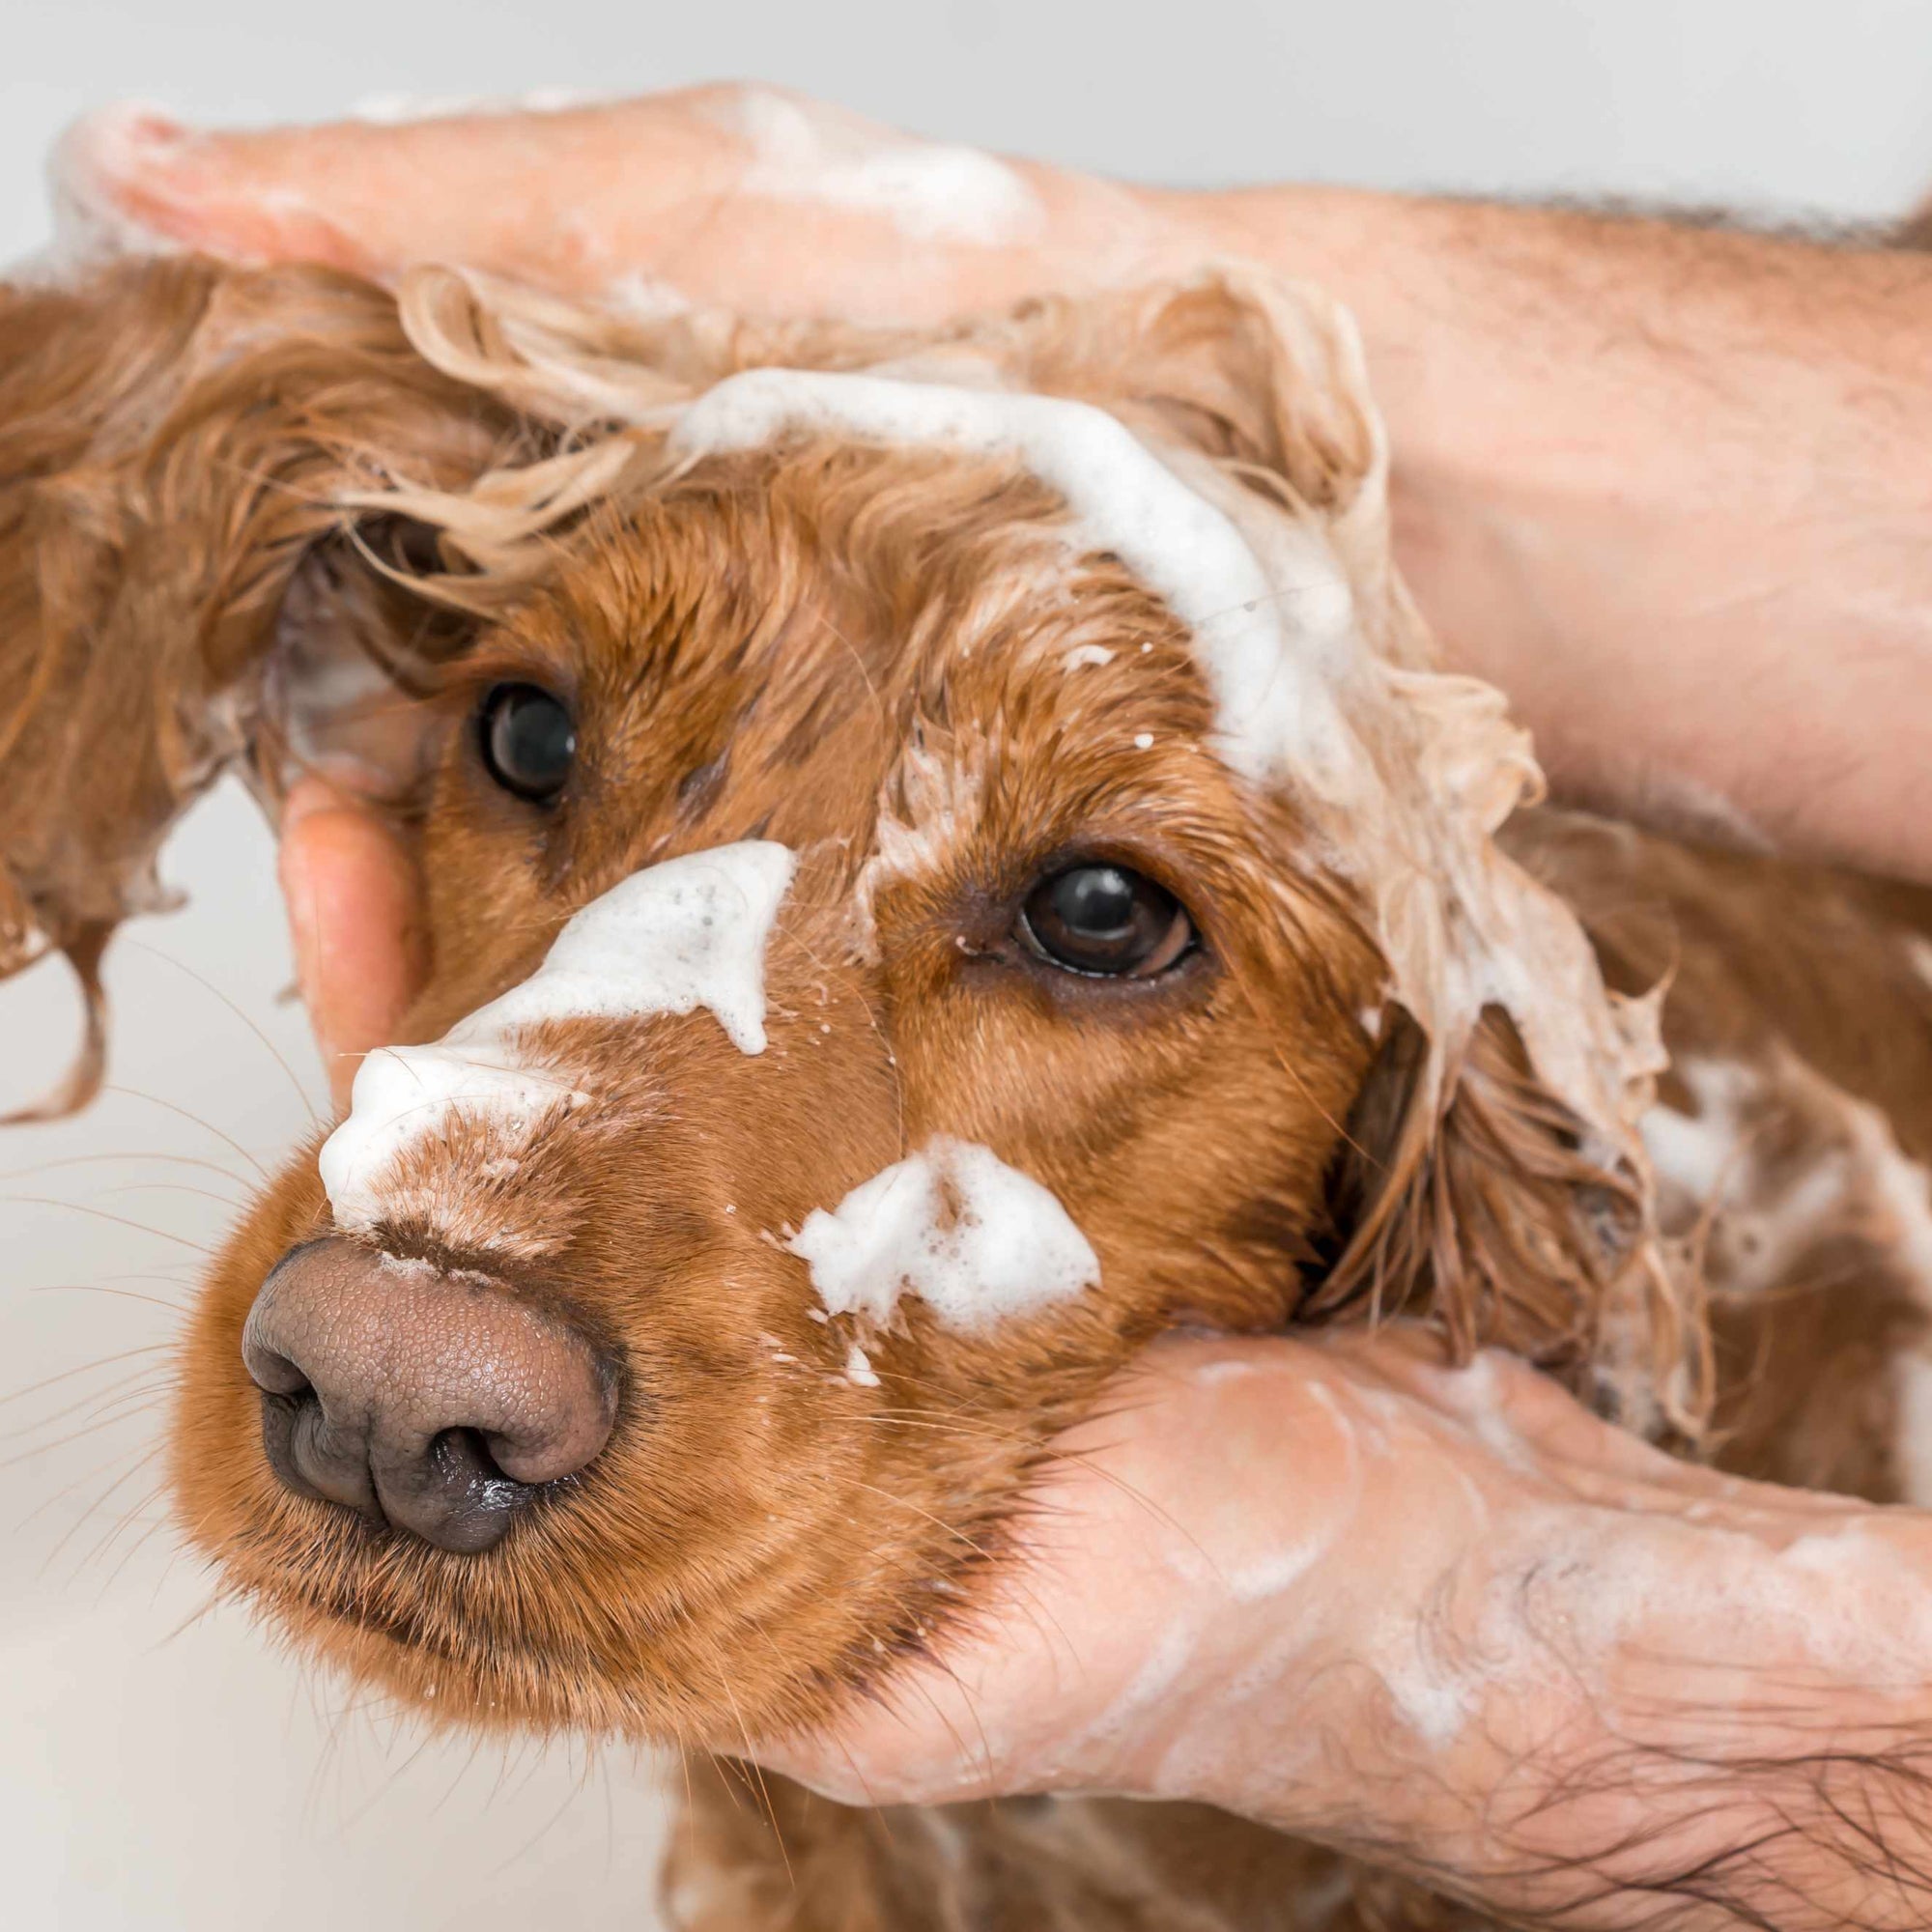 Selecting the Ideal Anti-Itch Shampoo for Dogs: A Guide for Professional Dog Groomers